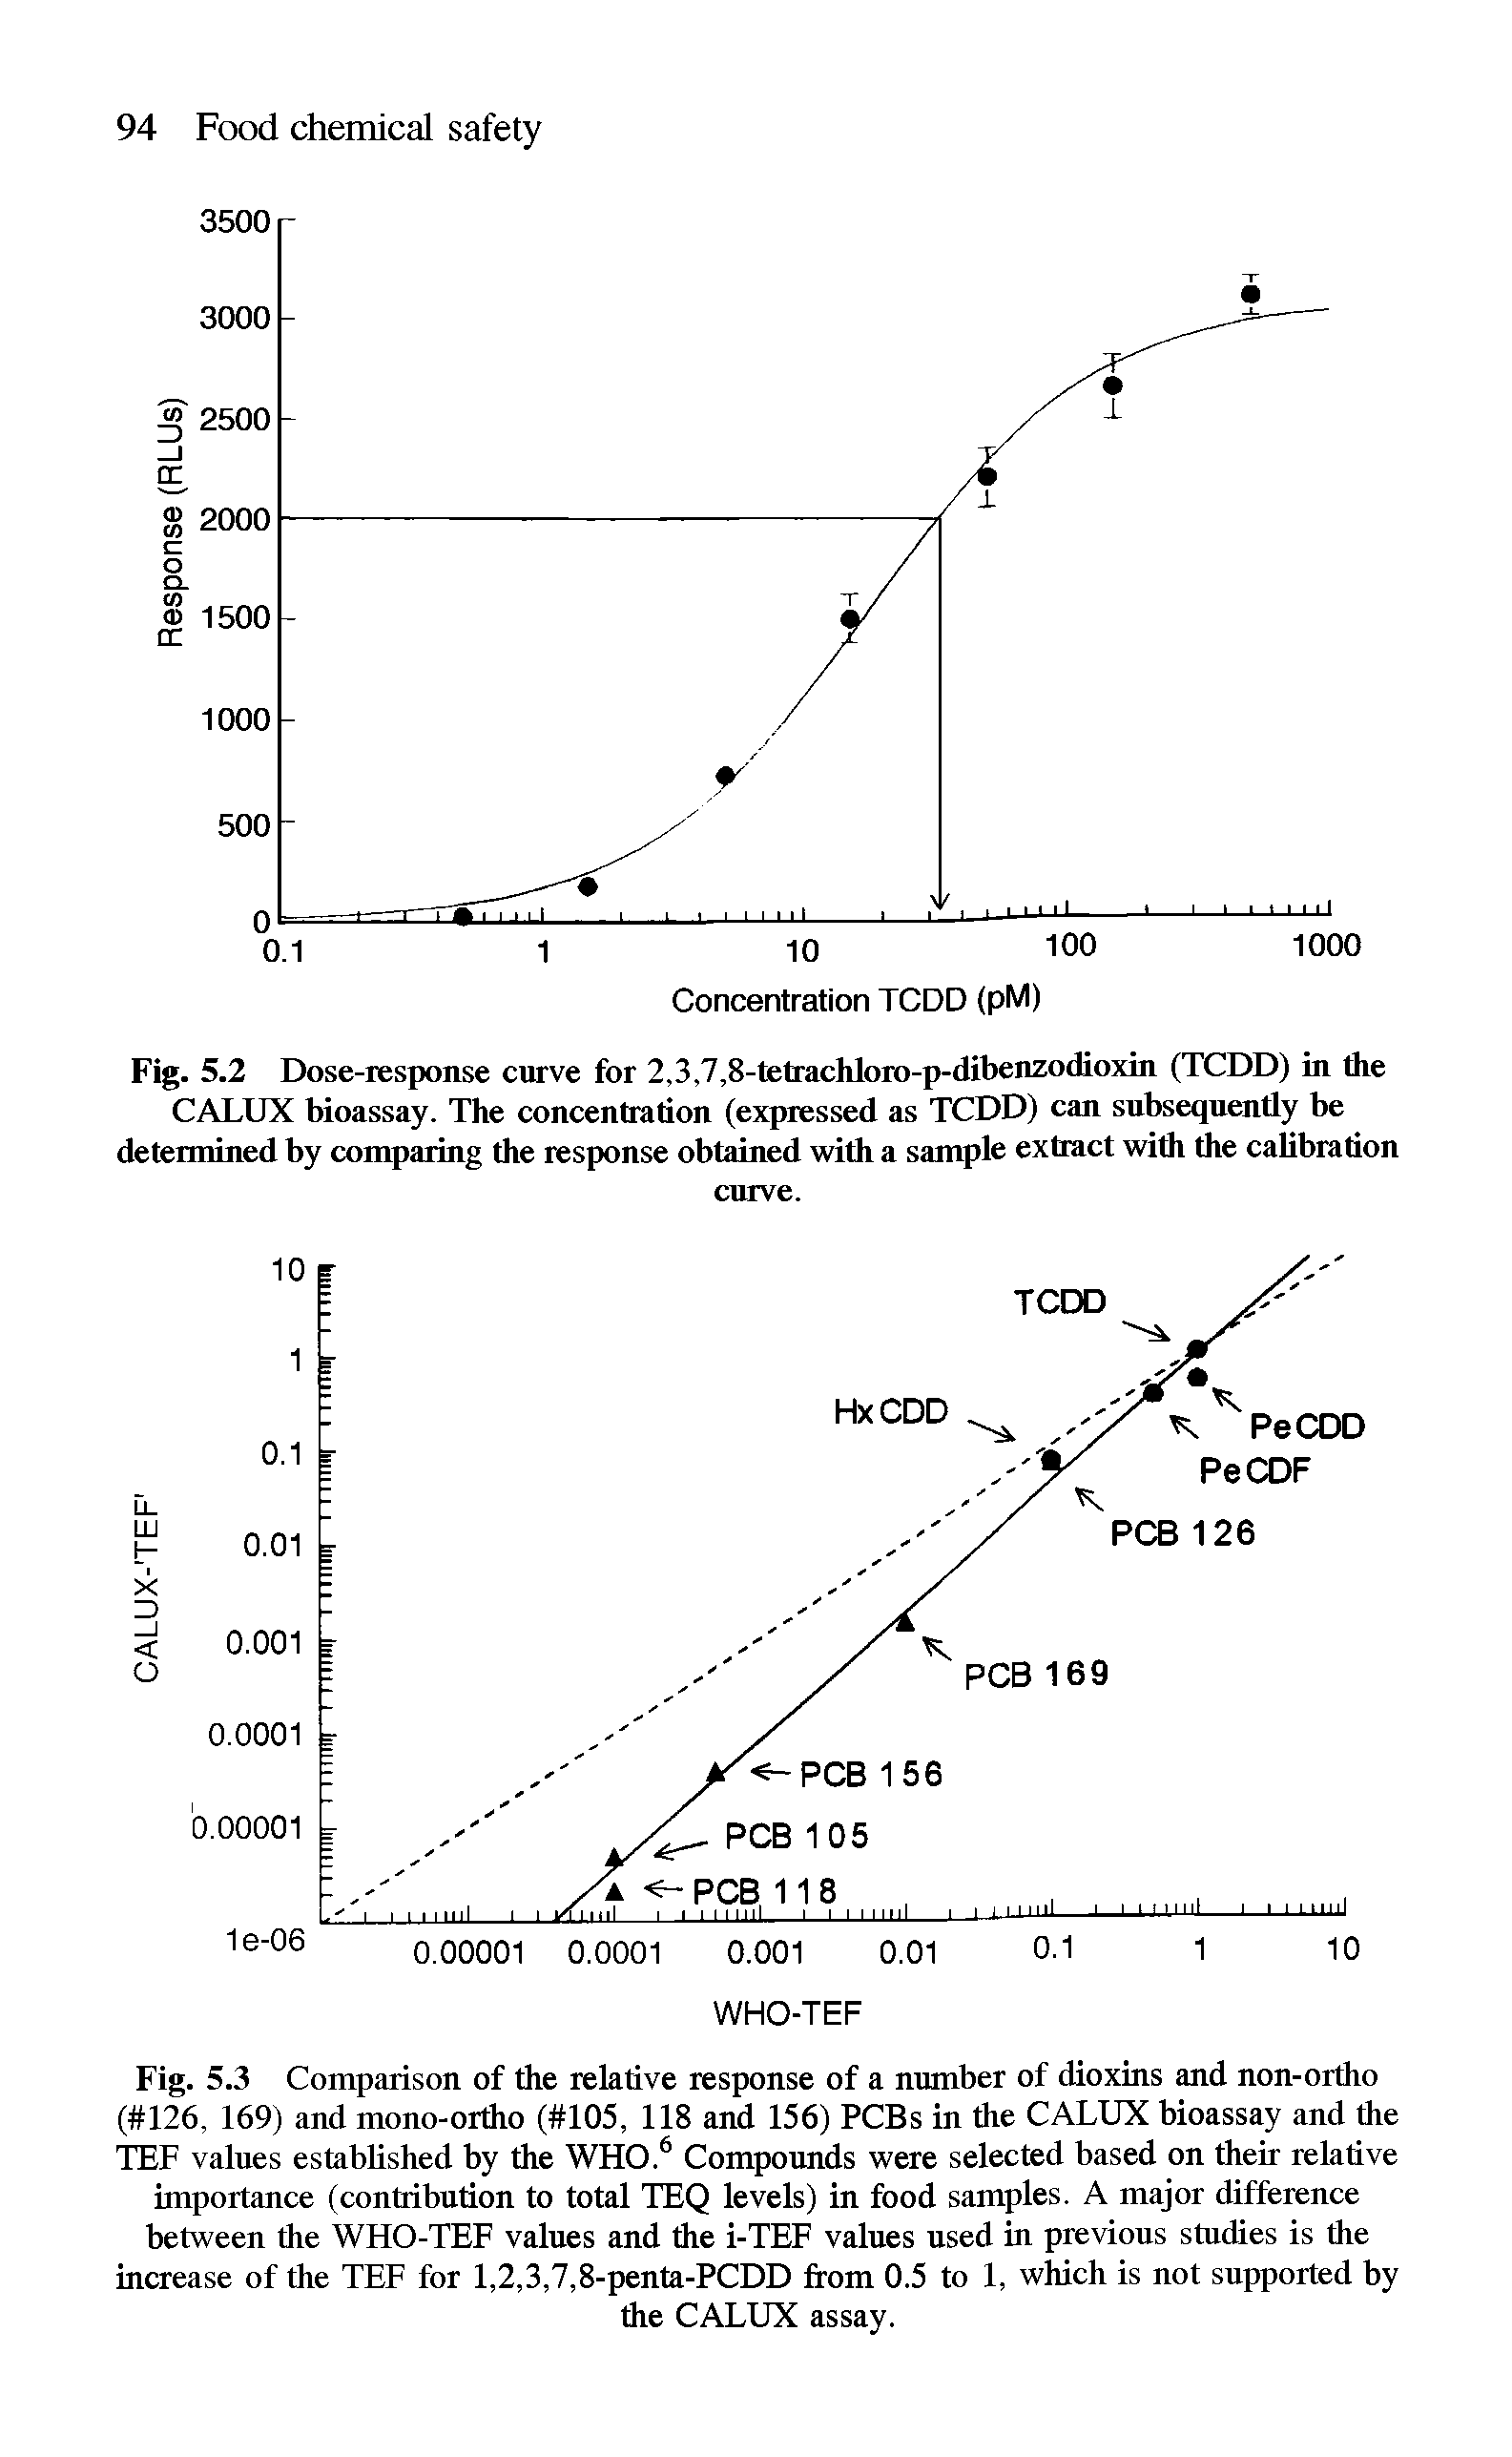 Fig. 5.2 Dose-response curve for 2,3,7,8-tetrachloro-p-dibenzodioxin (TCDD) in the CALUX bioassay. The concentration (expressed as TCDD) can subsequently be determined by comparing the response obtained with a sample extract with the calibration...